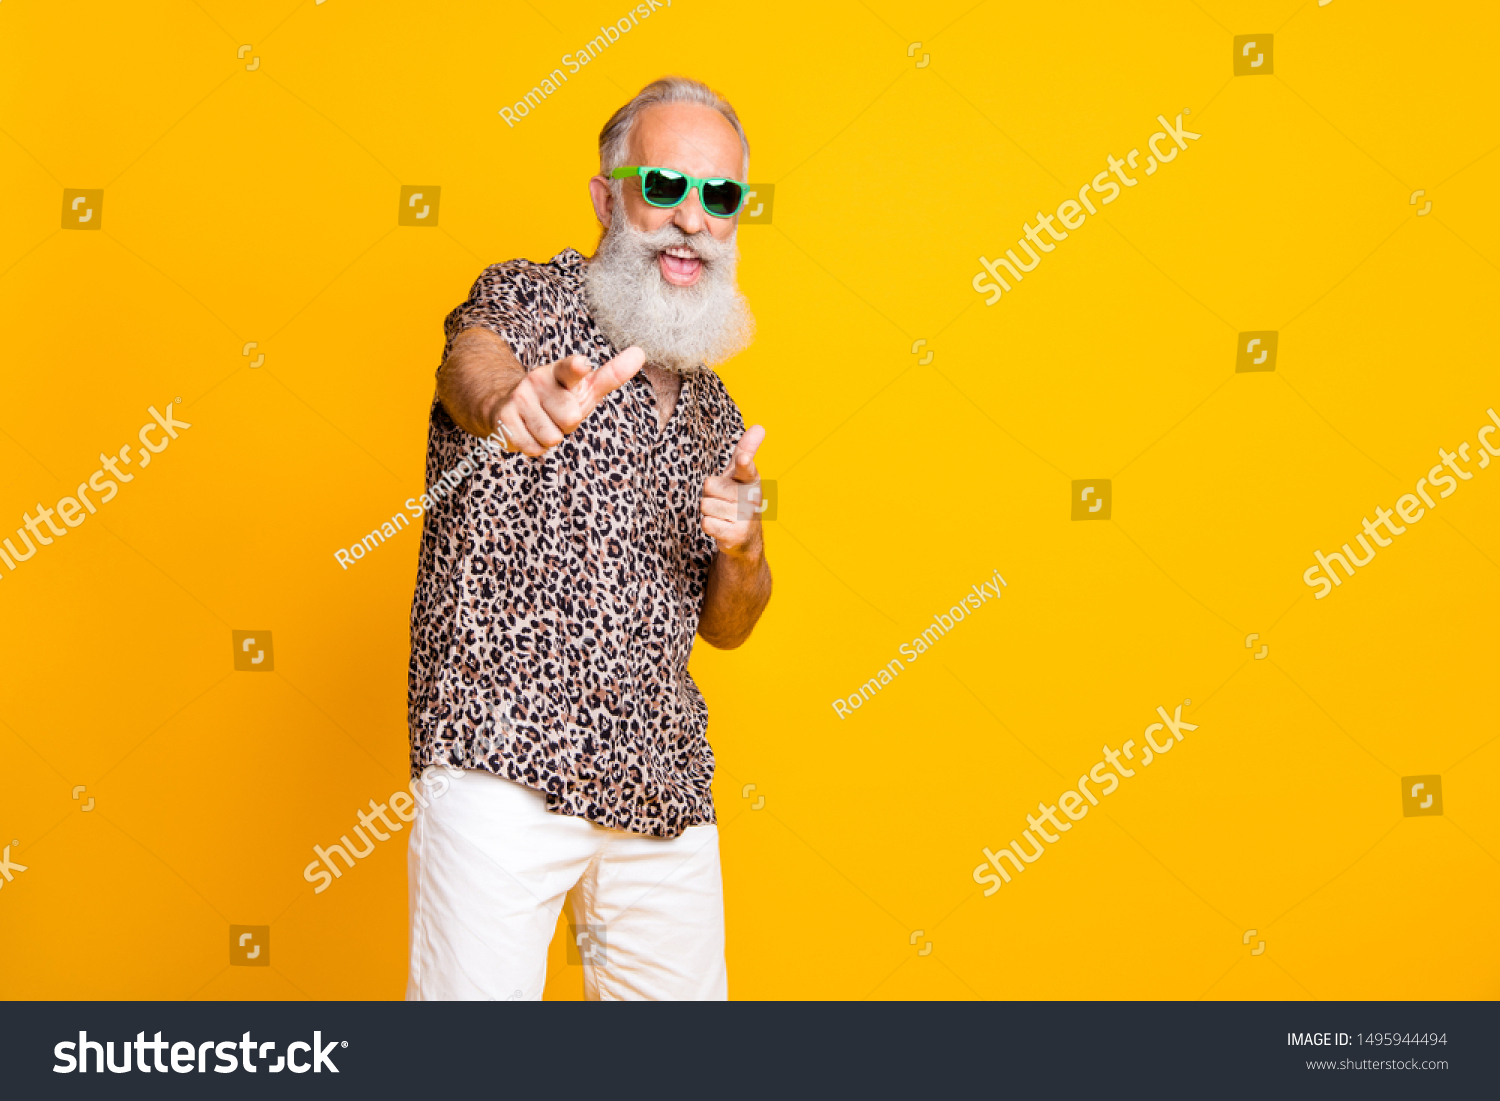 Portrait of crazy retired funny long bearded old man in eyewear eyeglasses brand feel crazy modern cool scream hey you wear leopard shirt shorts isolated over yellow background #1495944494